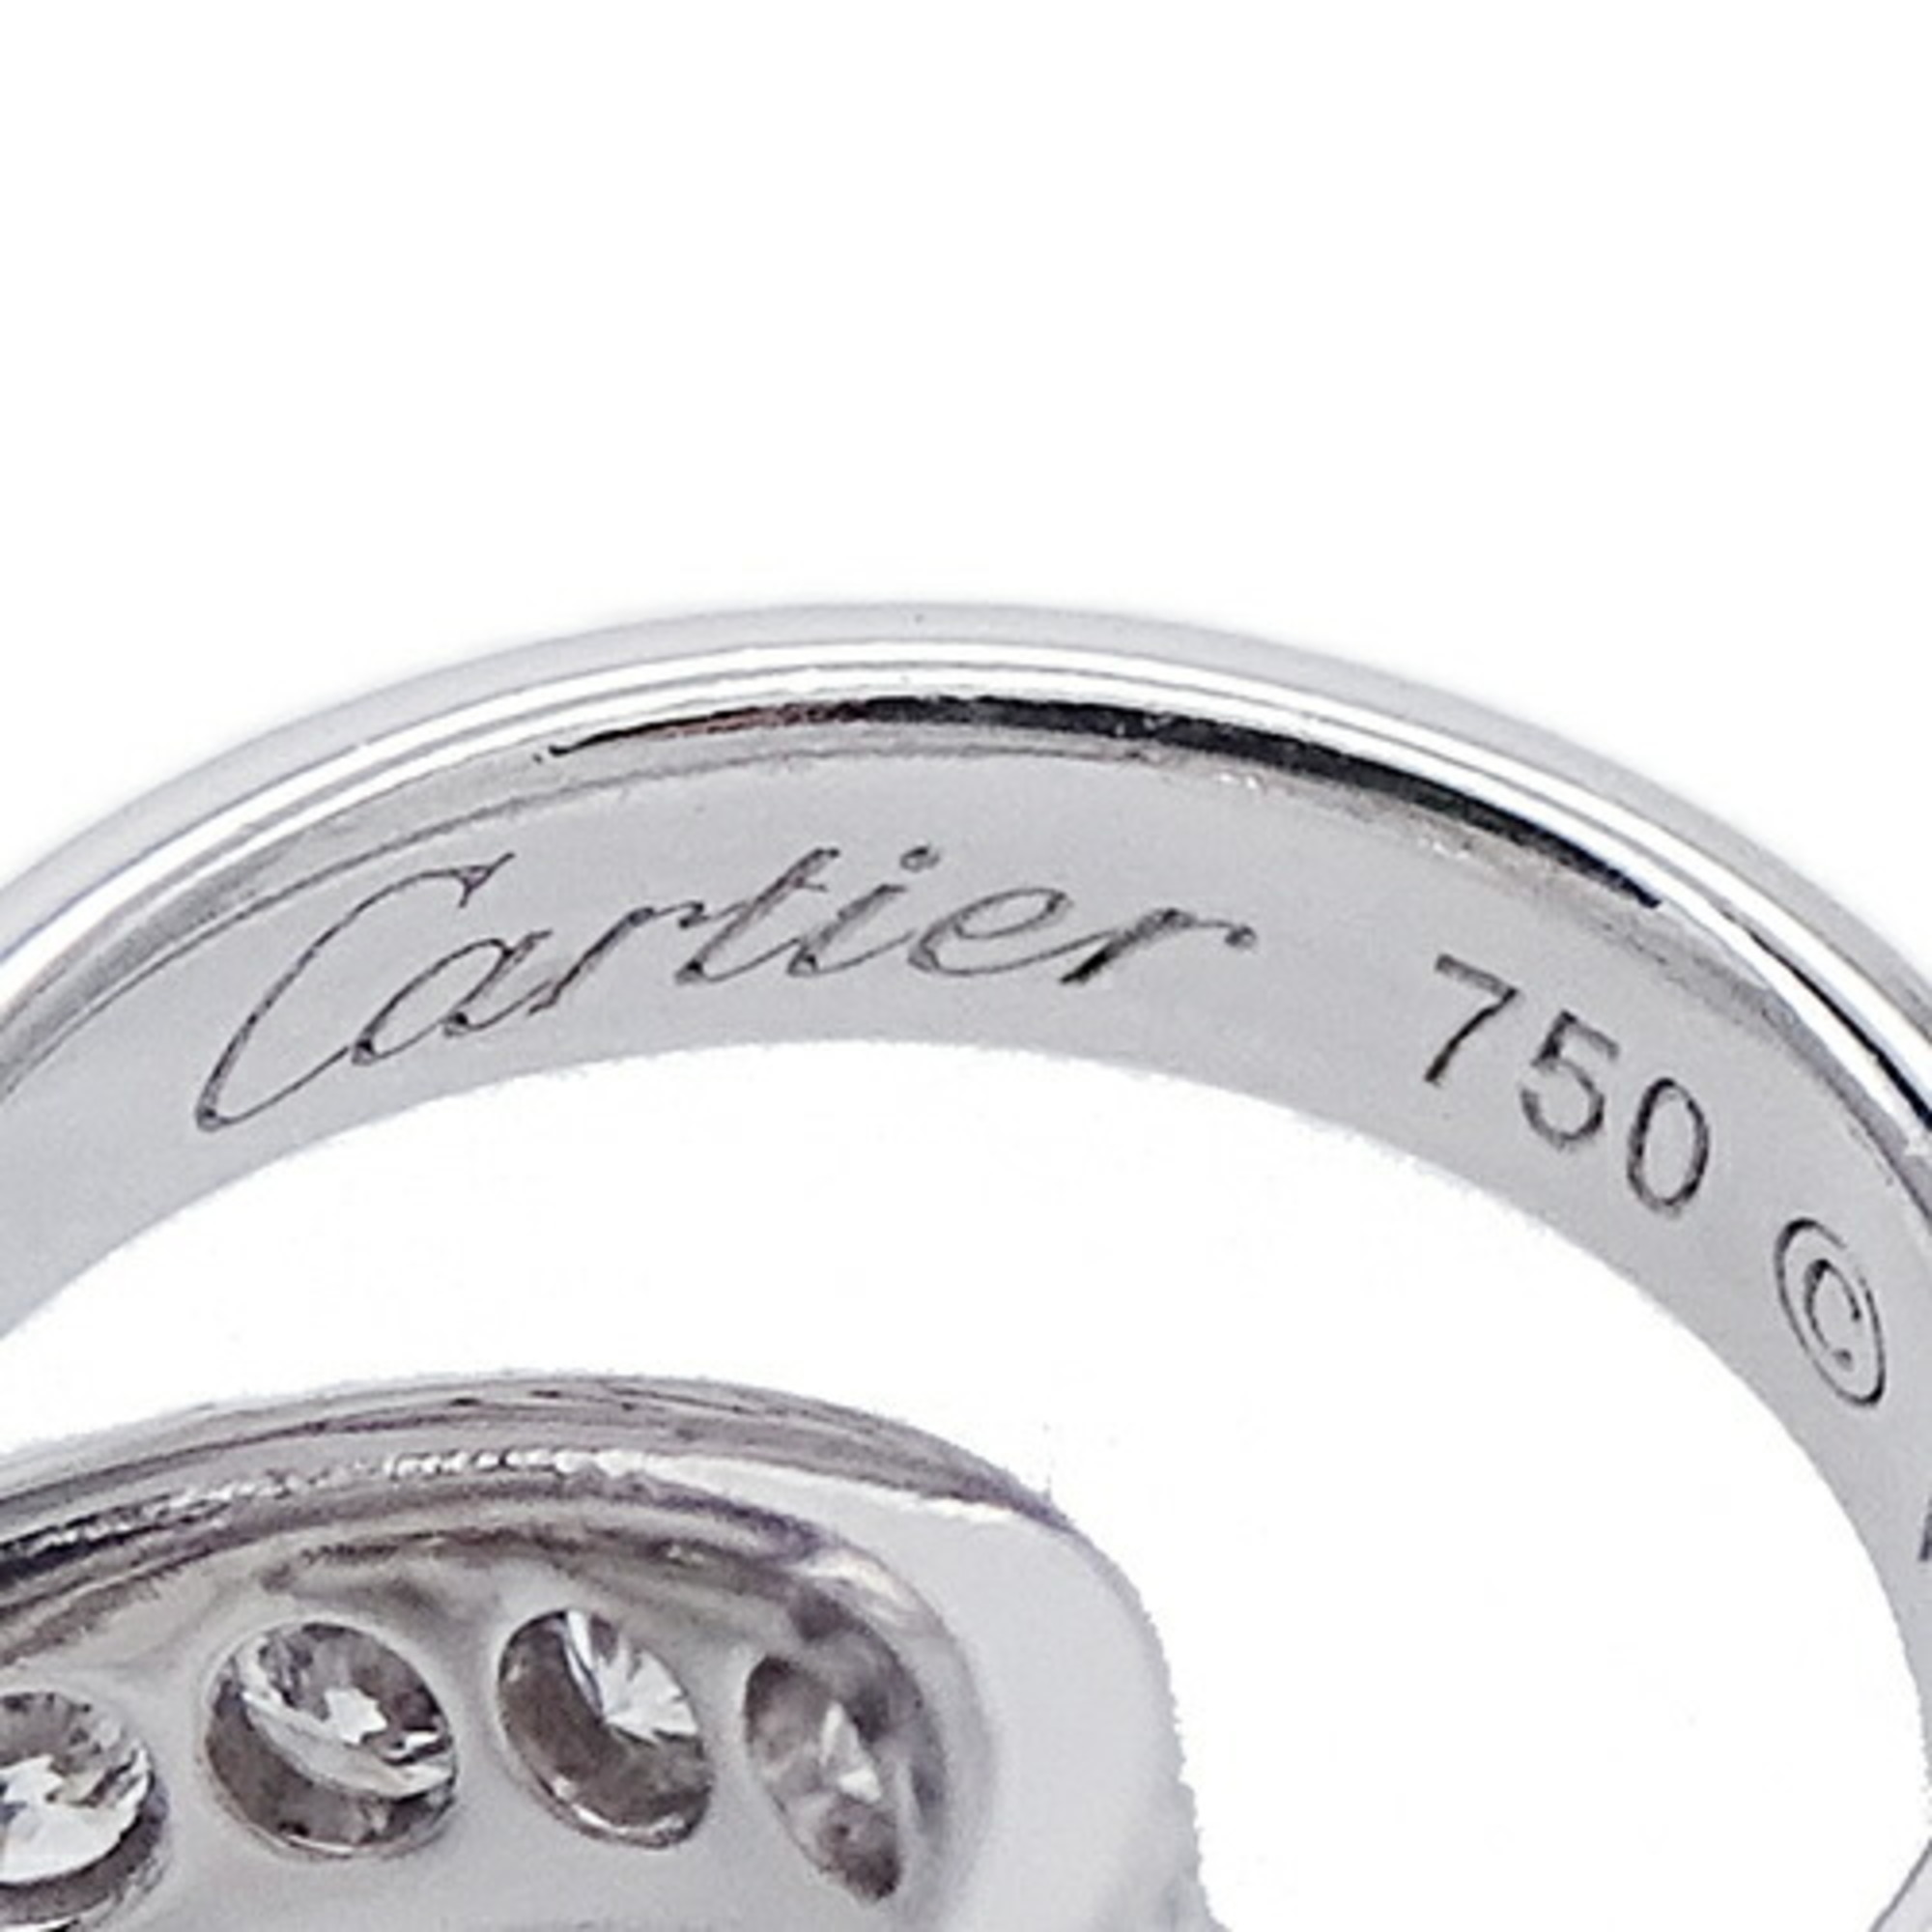 Cartier Necklace Ladies 750WG Diamond Baby Love LOVE White Gold B7013700 Polished